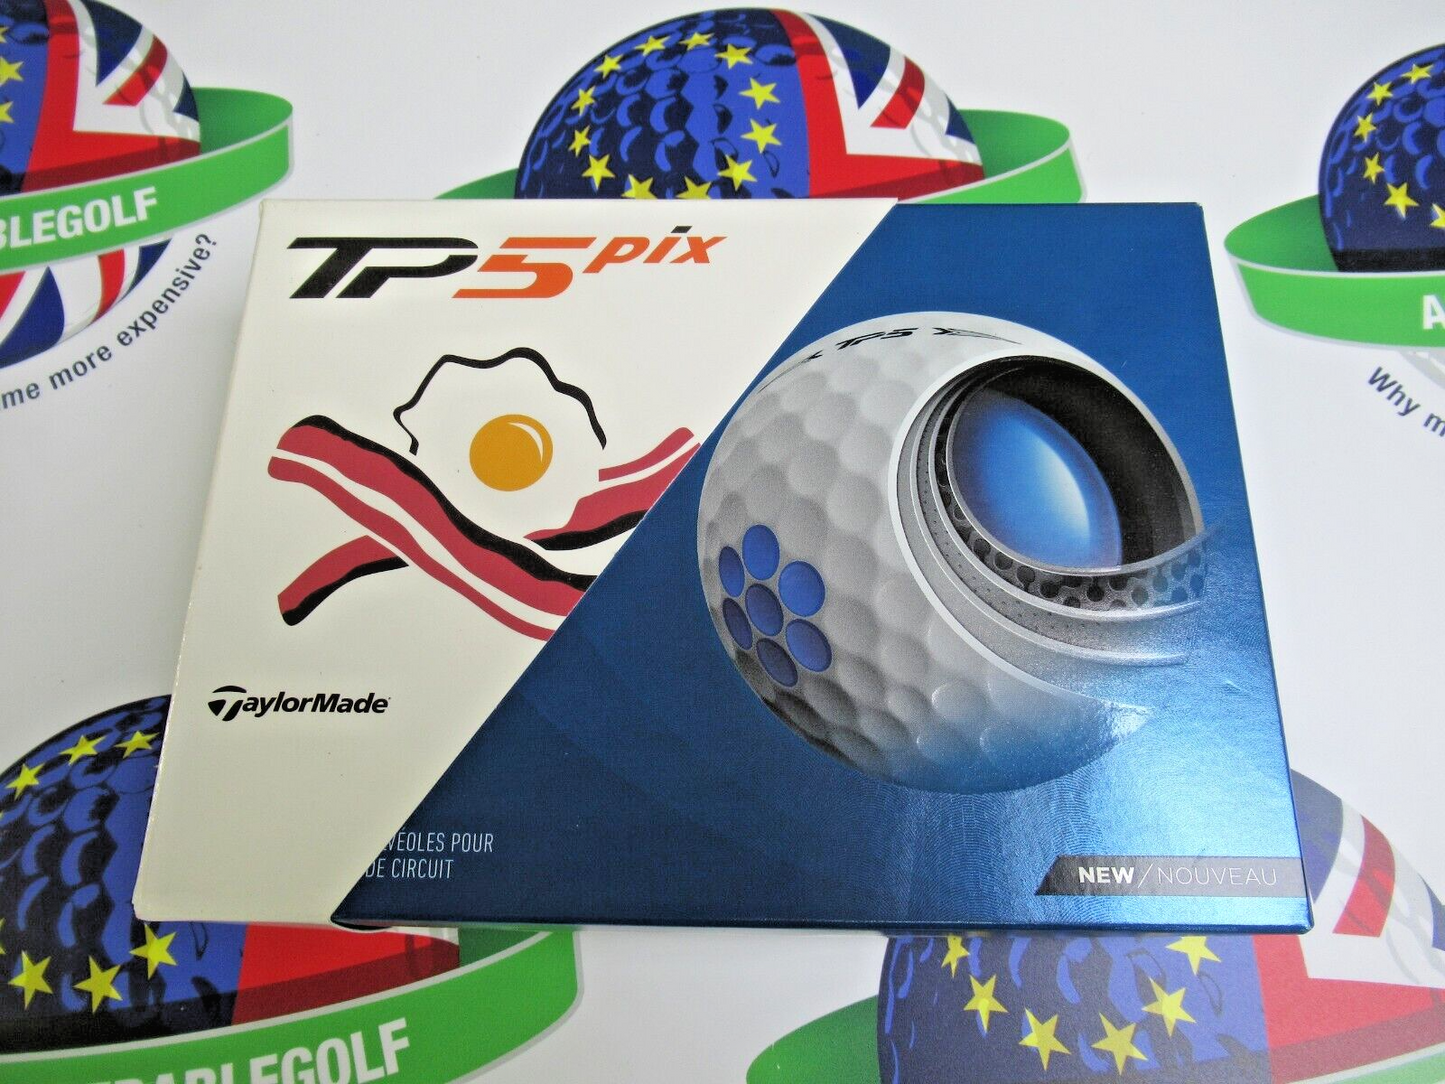 New 12 TaylorMade Vault Limited Edition Tp5 Pix Eggs & Bacon Golf Balls